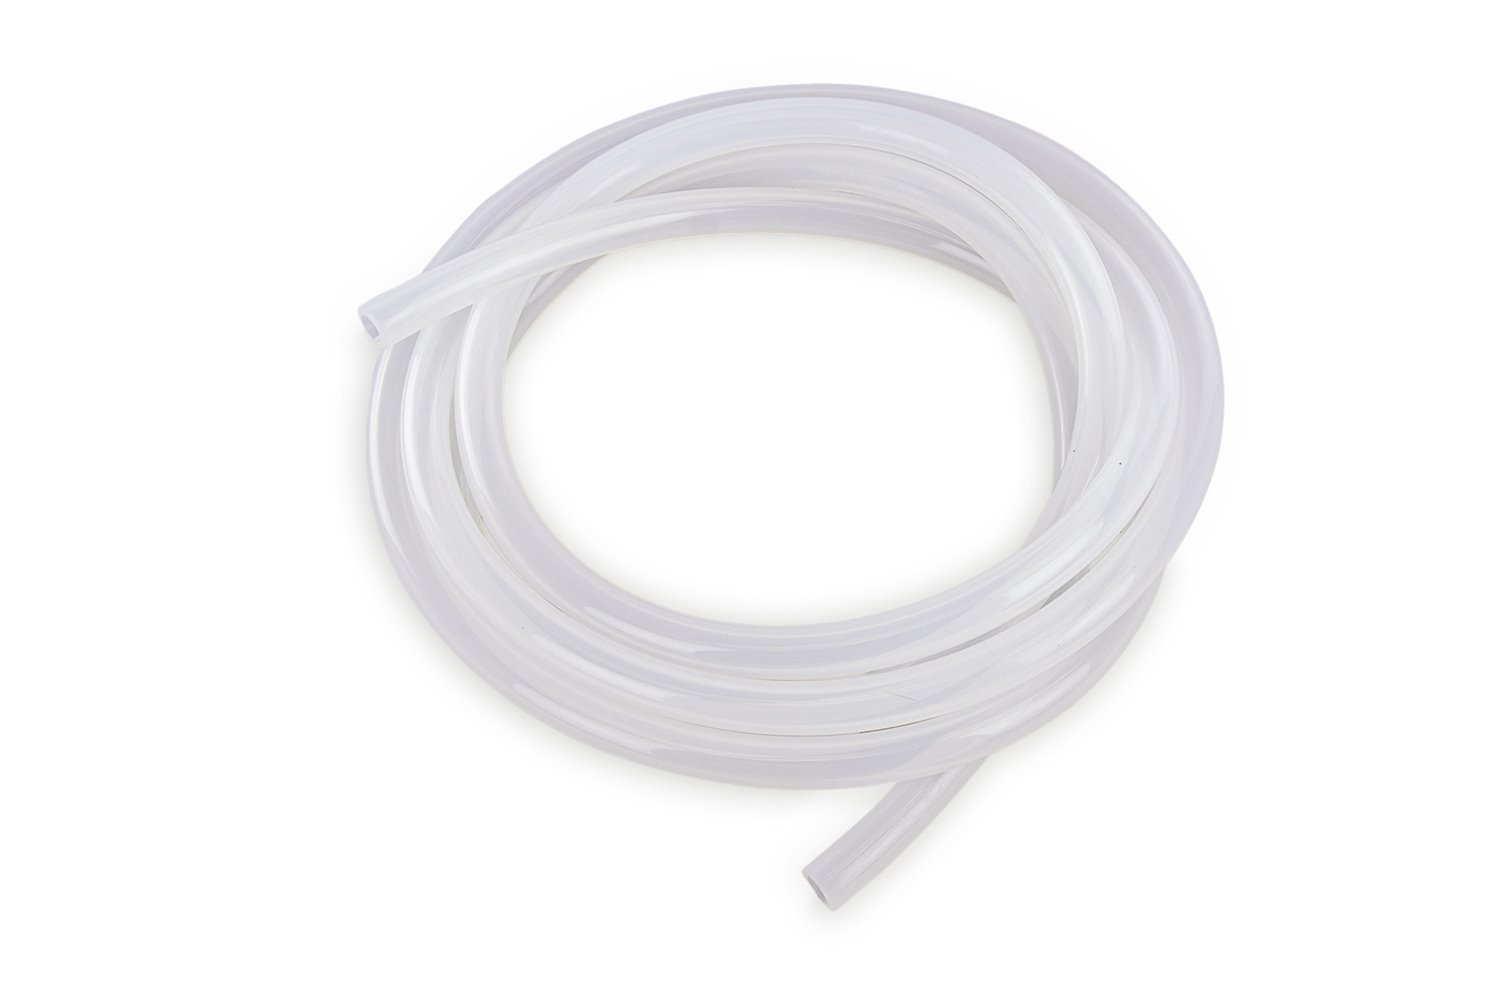 HTSVH8-CLEAR High-Temperature Silicone Vacuum Hose Tubing, 5/16 in. ID, Clear